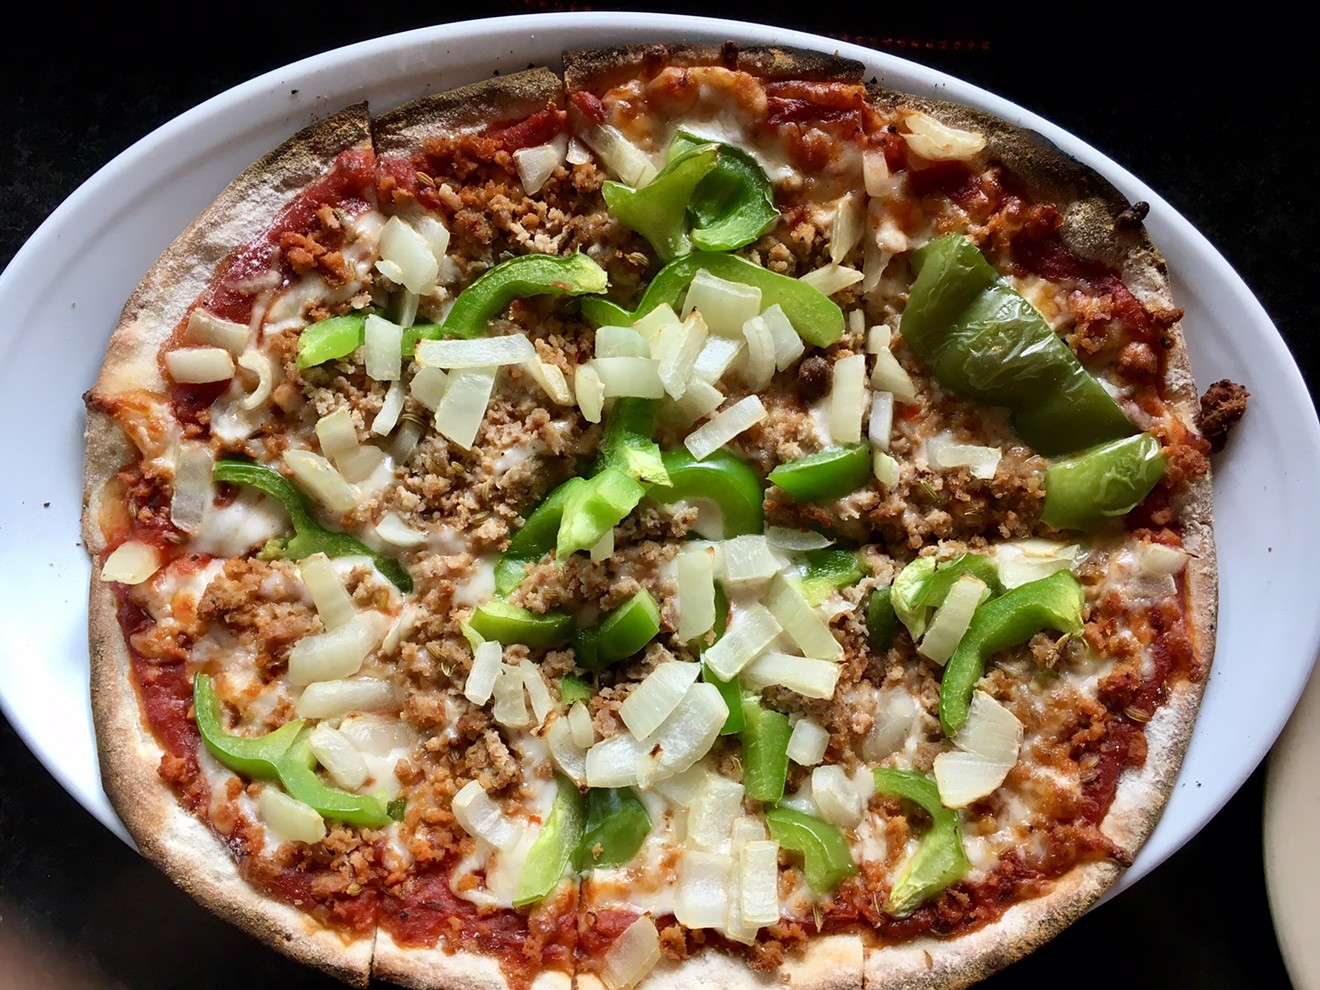 A drop-dead inexpensive pizza at Scalini's in Lakewood, with sausage, green pepper and onion.